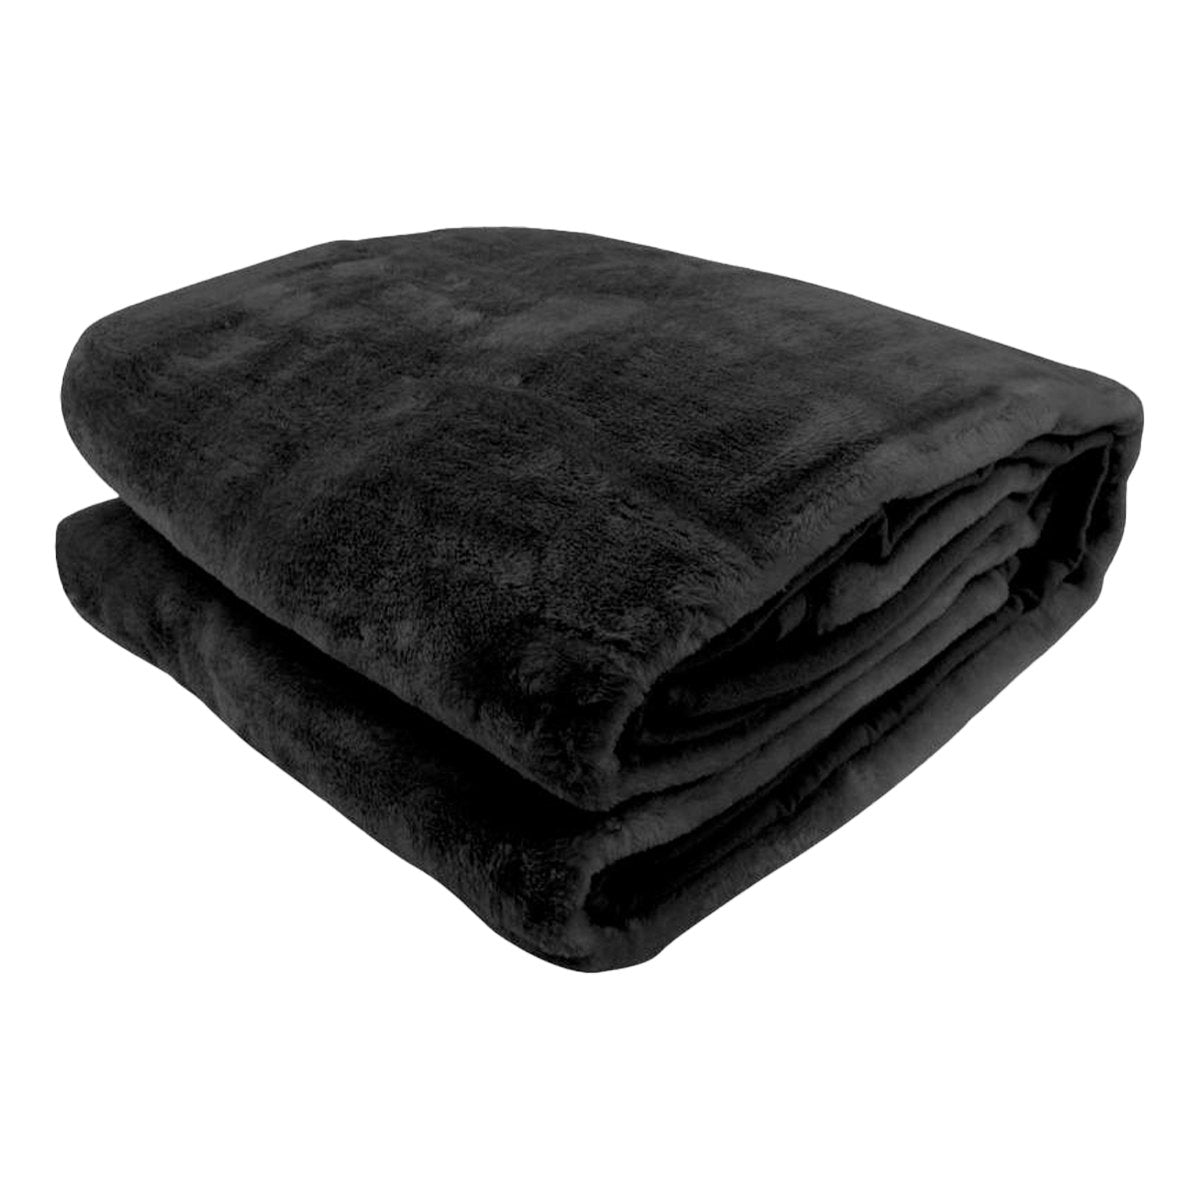 800-gsm Faux Mink Throw Rug Blanket Queen Size Double-sided Large Super Luxurious Soft Heavy - Black